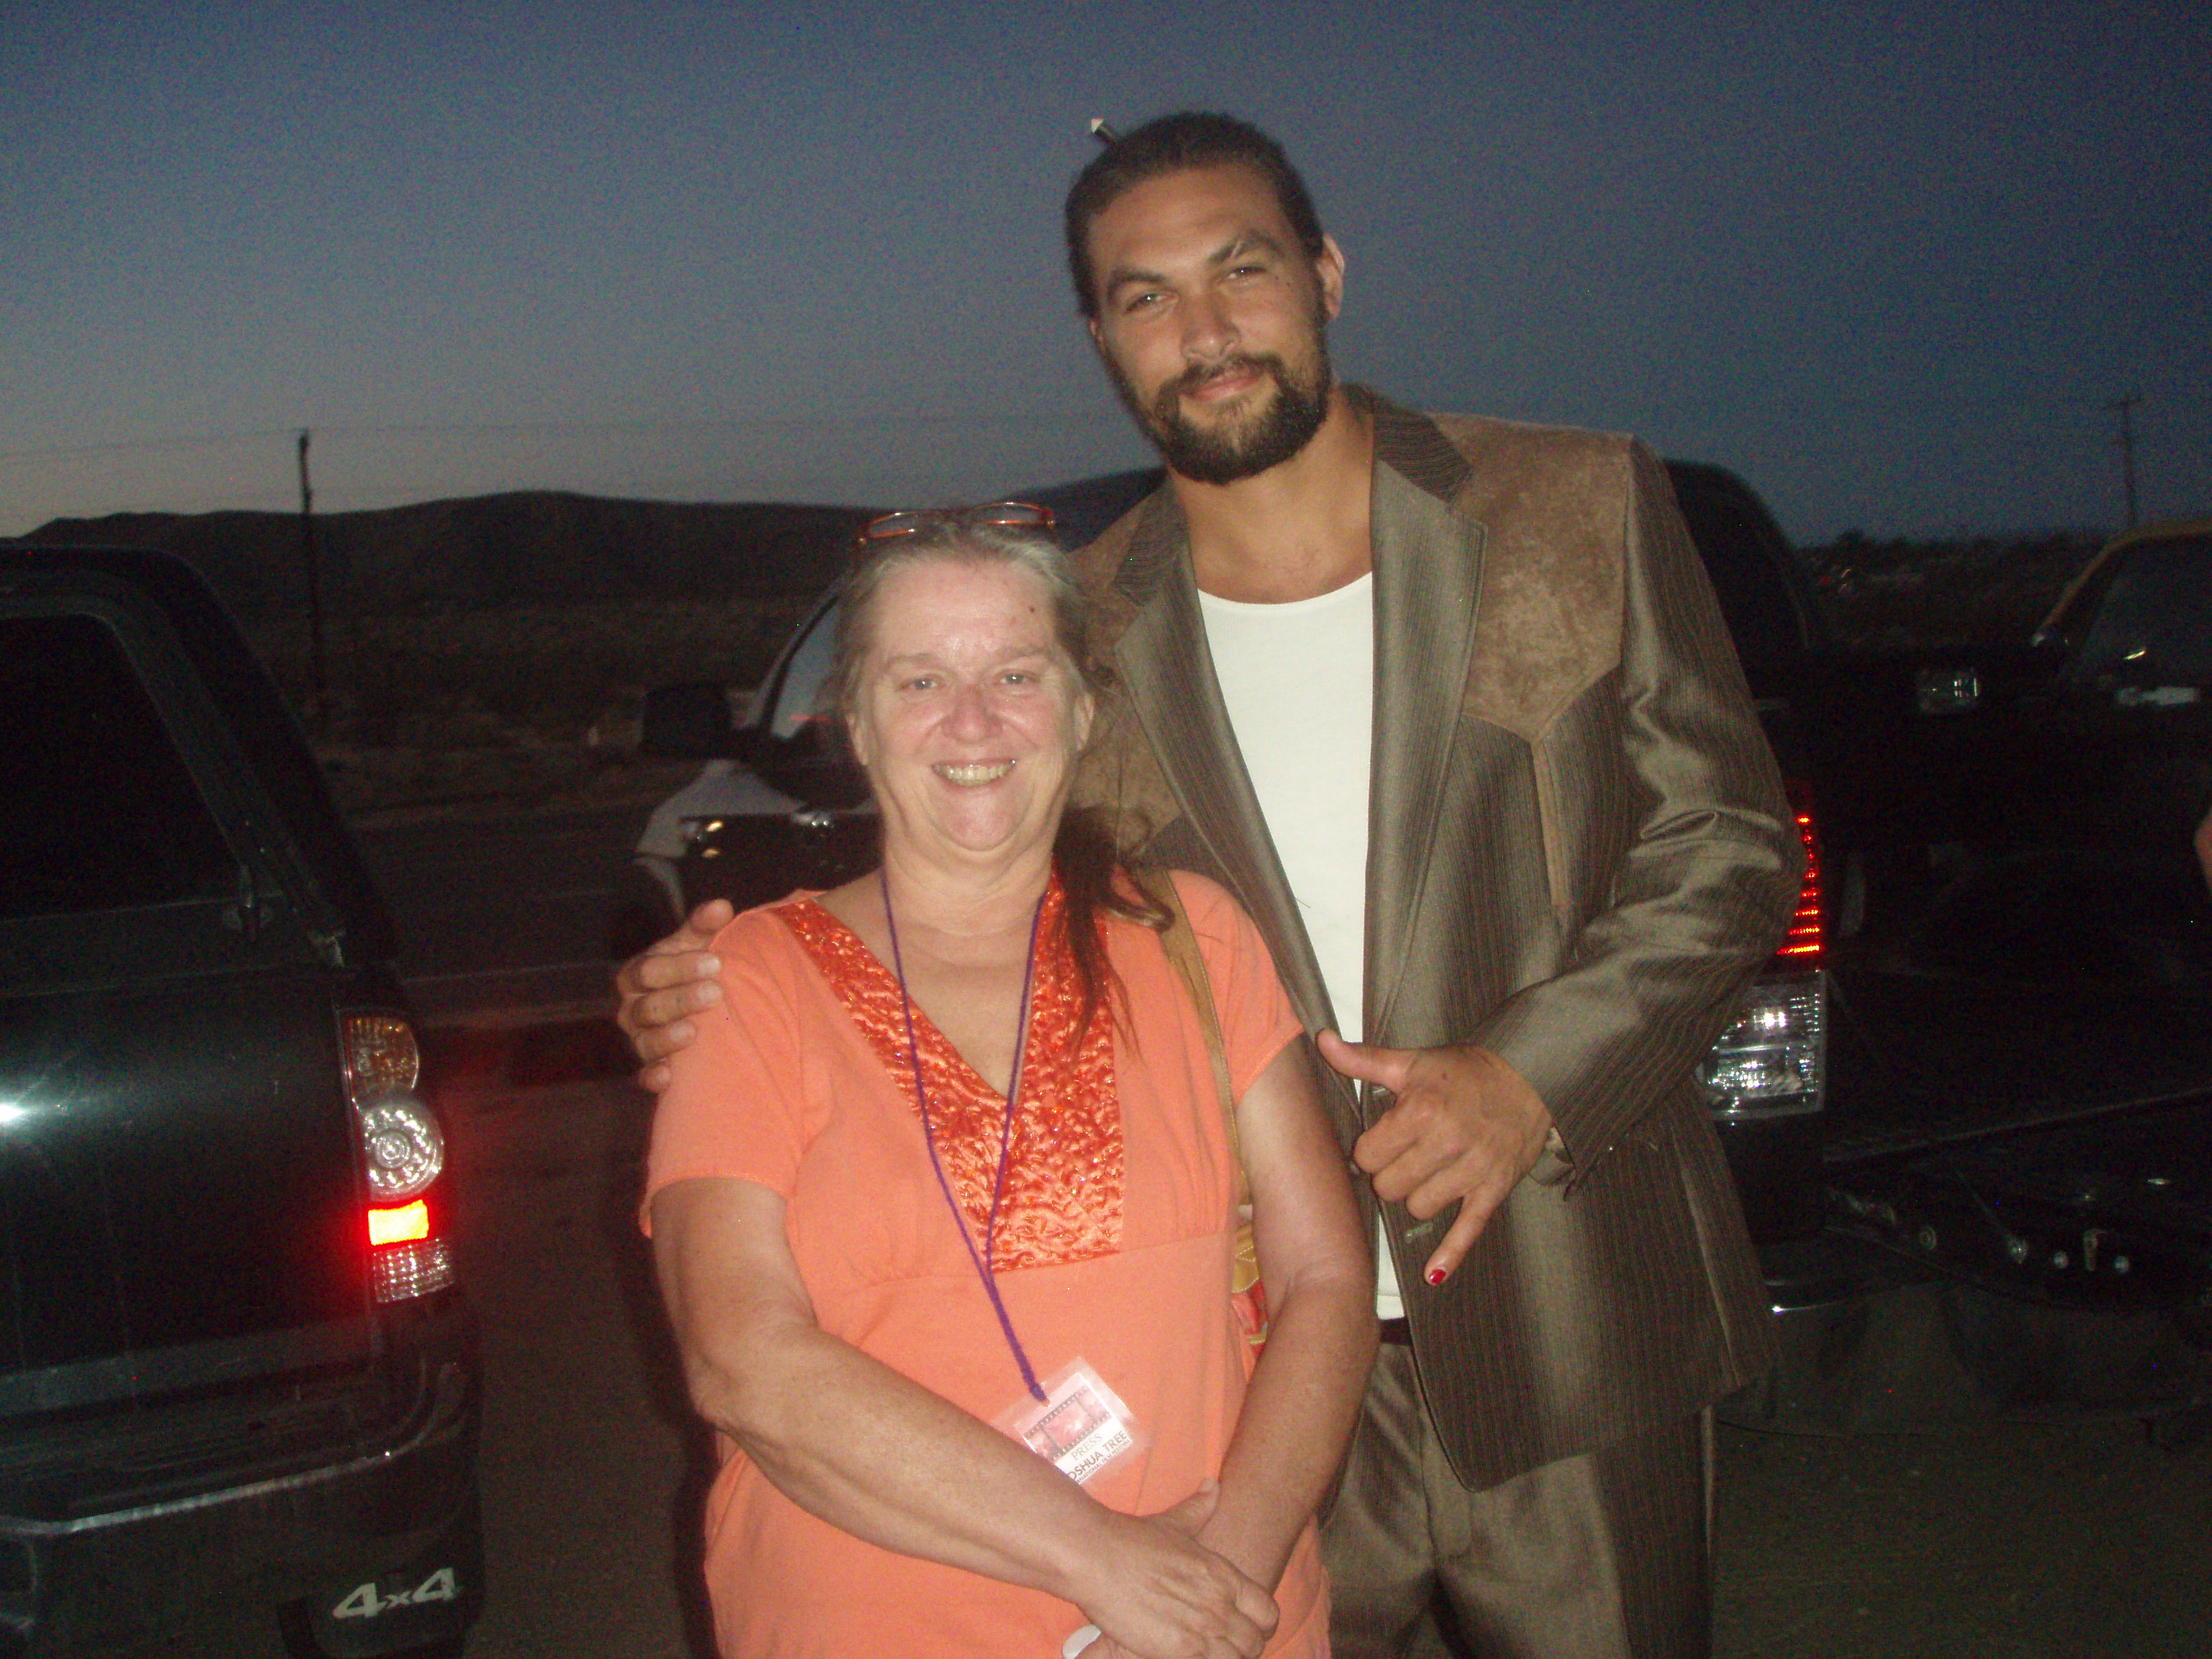 Luke's Mother-in-Law Interviews Jason Momoa (and Reviews the Joshua Tree Film Festival ...3072 x 2304